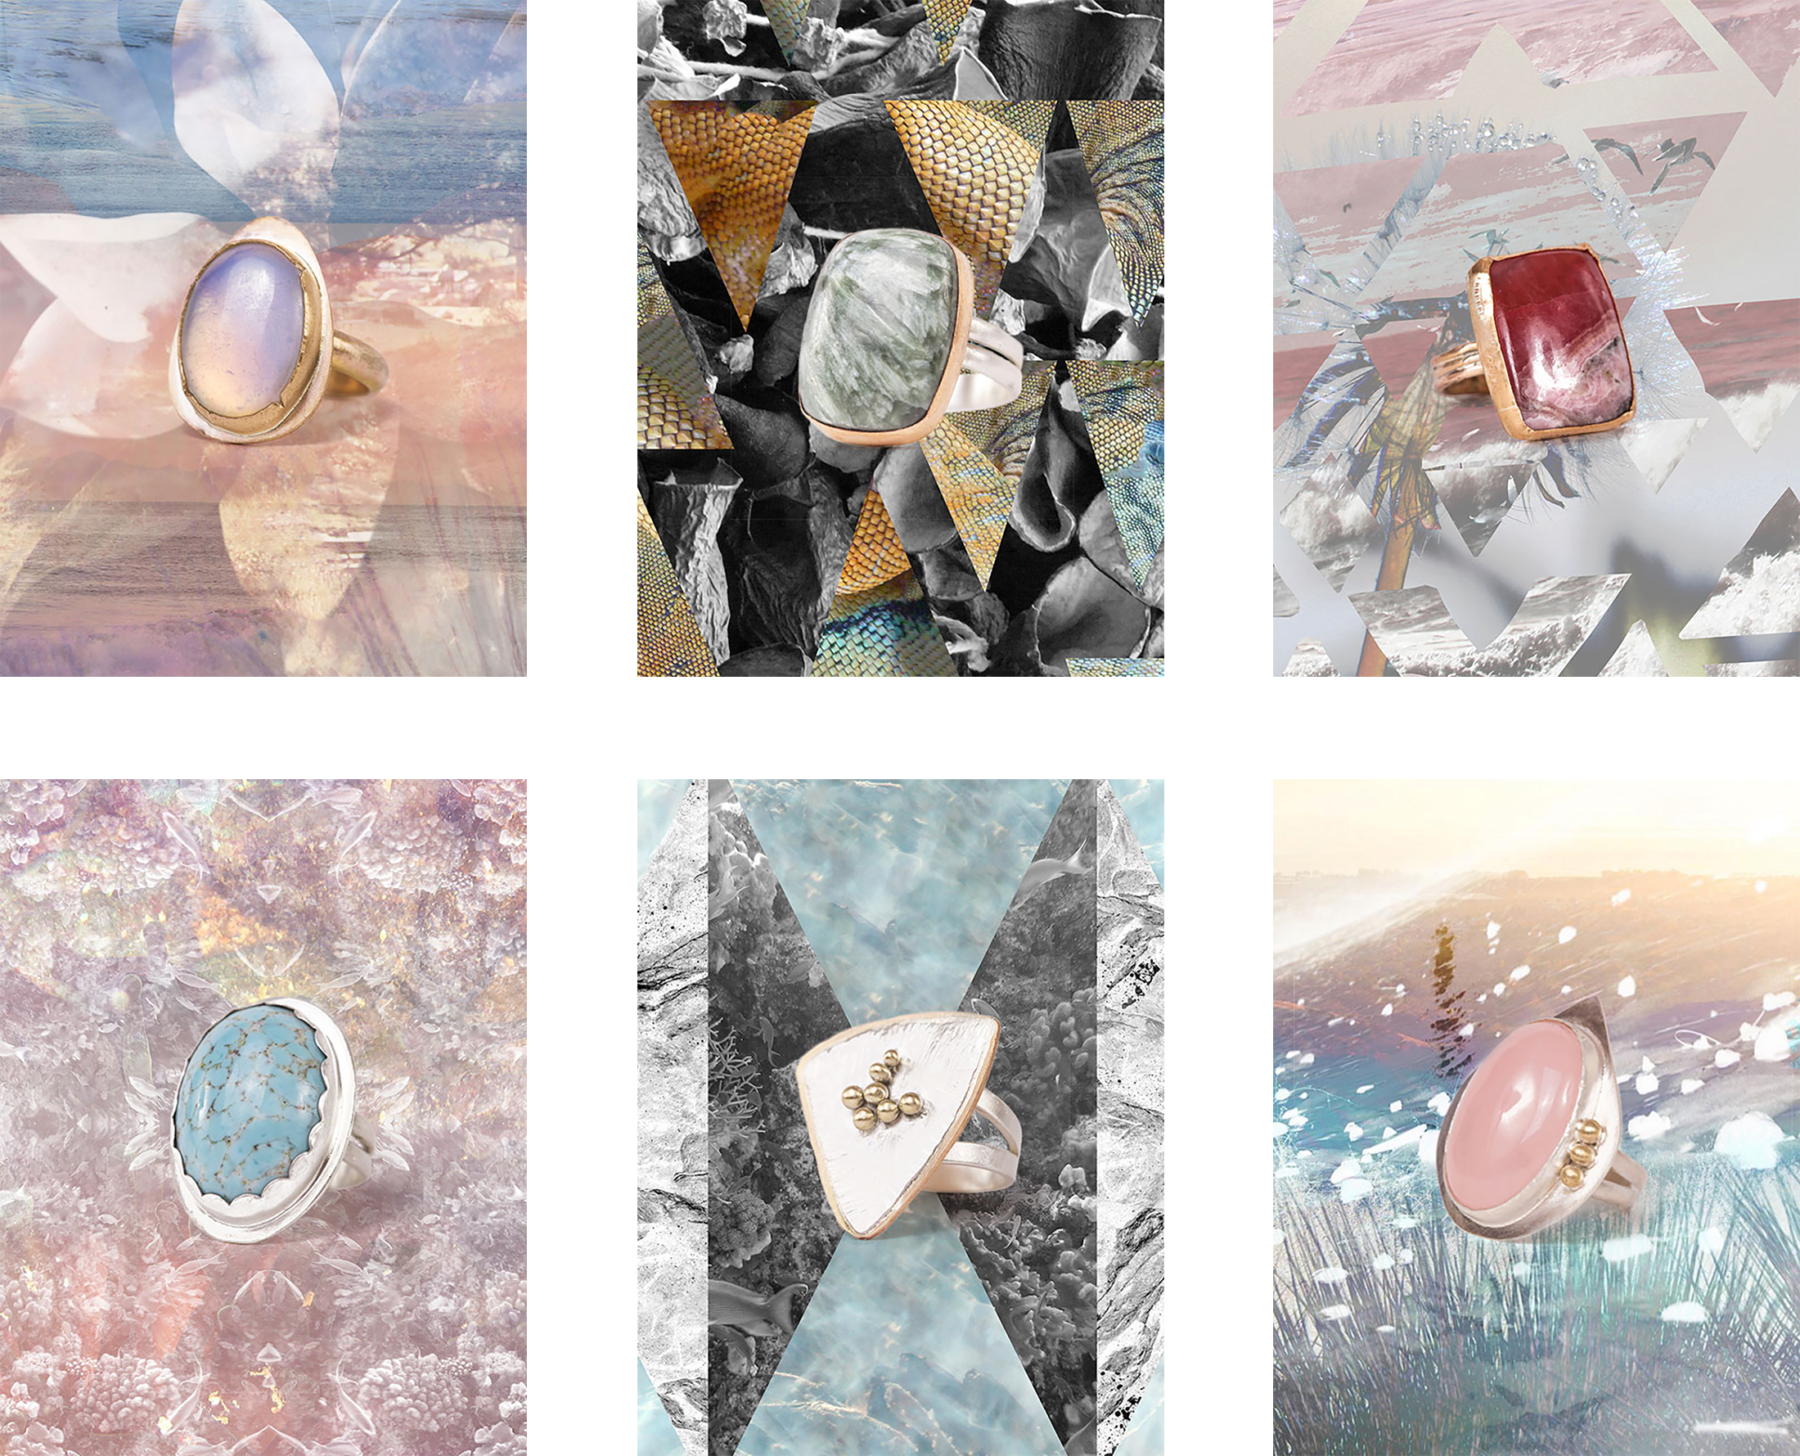 6 organic shaped rings made by Olwen Jewelry with large stones in the middle, crafte out of silver, gold and rose gold, against a variety of photo manipulated backgrounds.